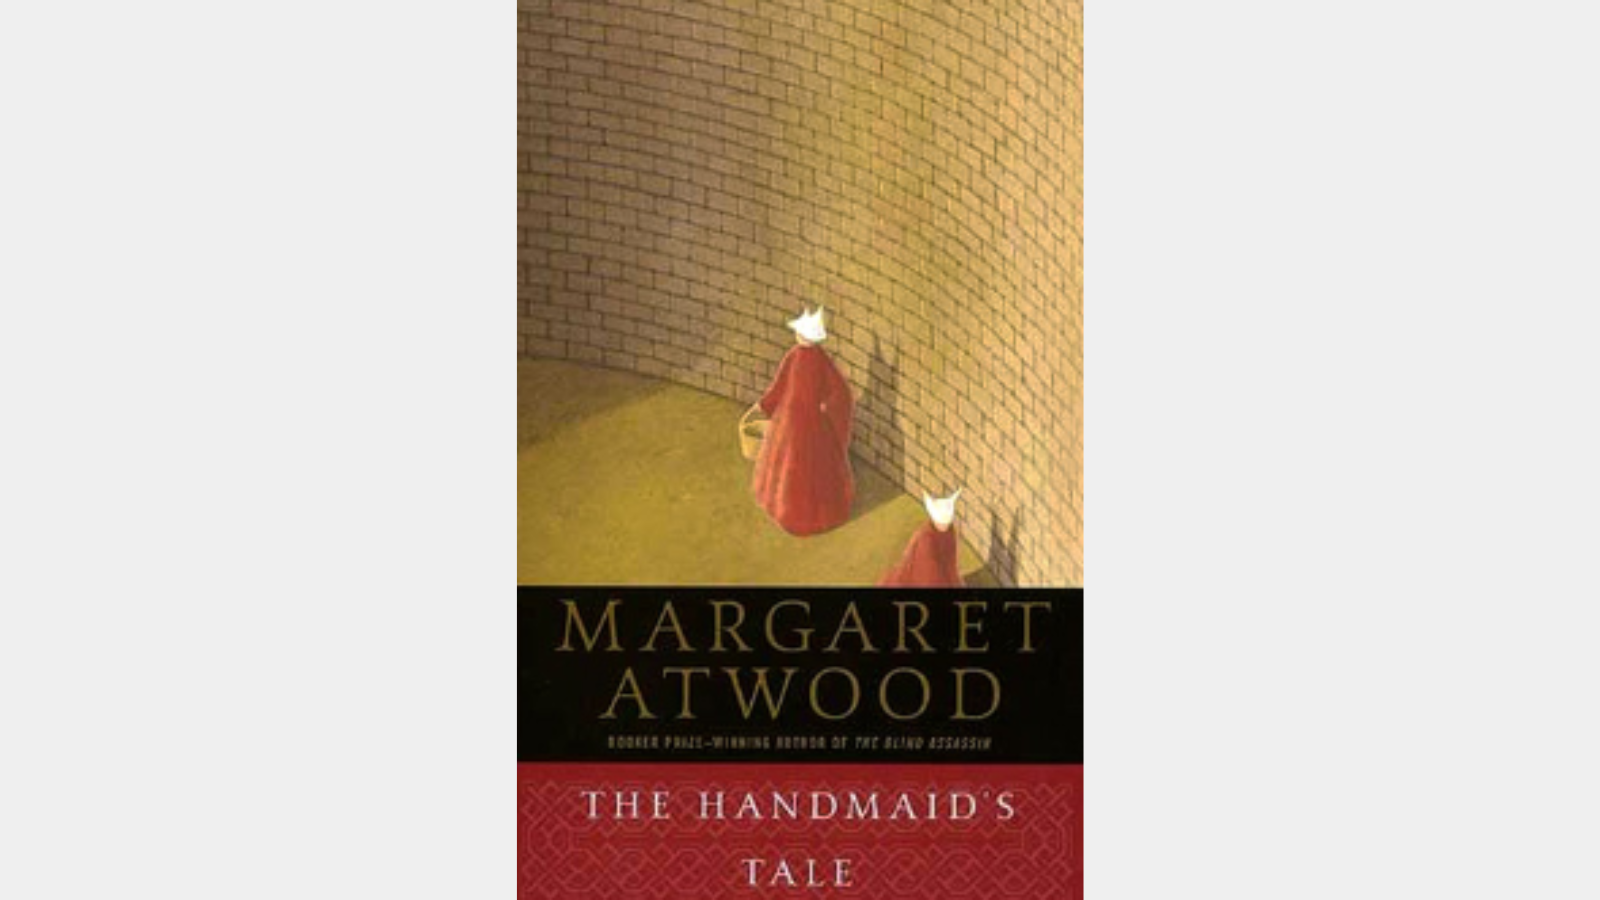 <p><span>Some have given up on Atwood despite her success with </span><i><span>The Handmaid’s Tale</span></i><span>. A user gives a more nuanced take saying that Atwood can sometimes deploy devastating, effective writing while delivering cheesy, overwrought predictions in other cases.</span></p>